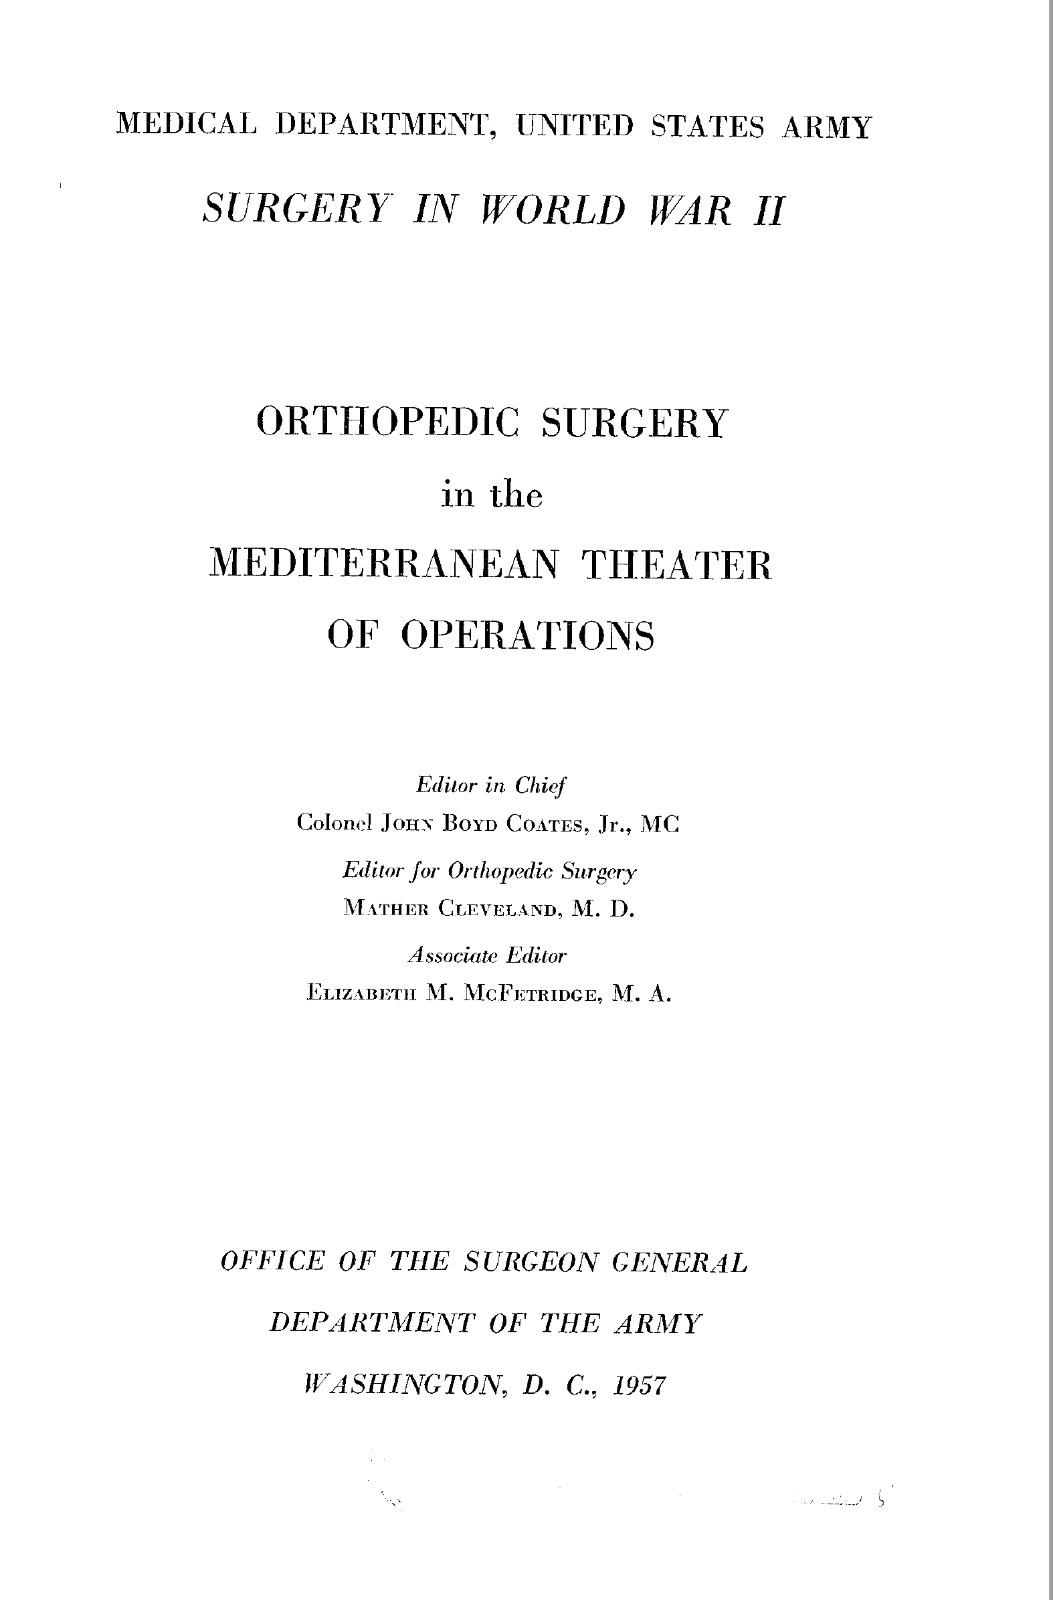 381 Page 1957 Orthopedic Surgery European Theater of Operations Book on Data CD